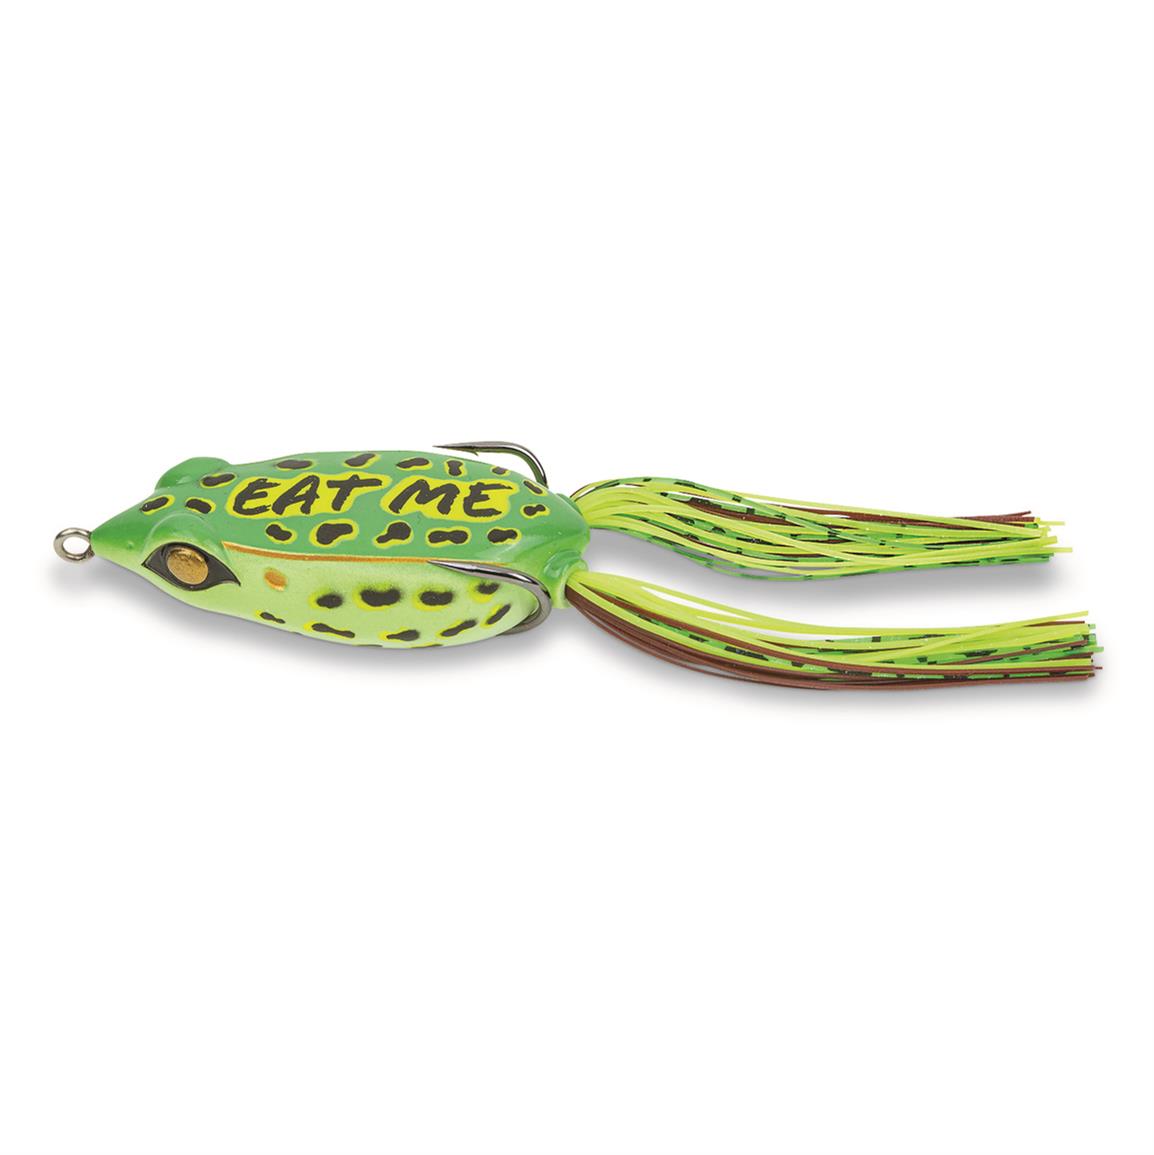 Z-Man Hellraizer Topwater Lure - 733339, Top Water Baits at Sportsman's  Guide